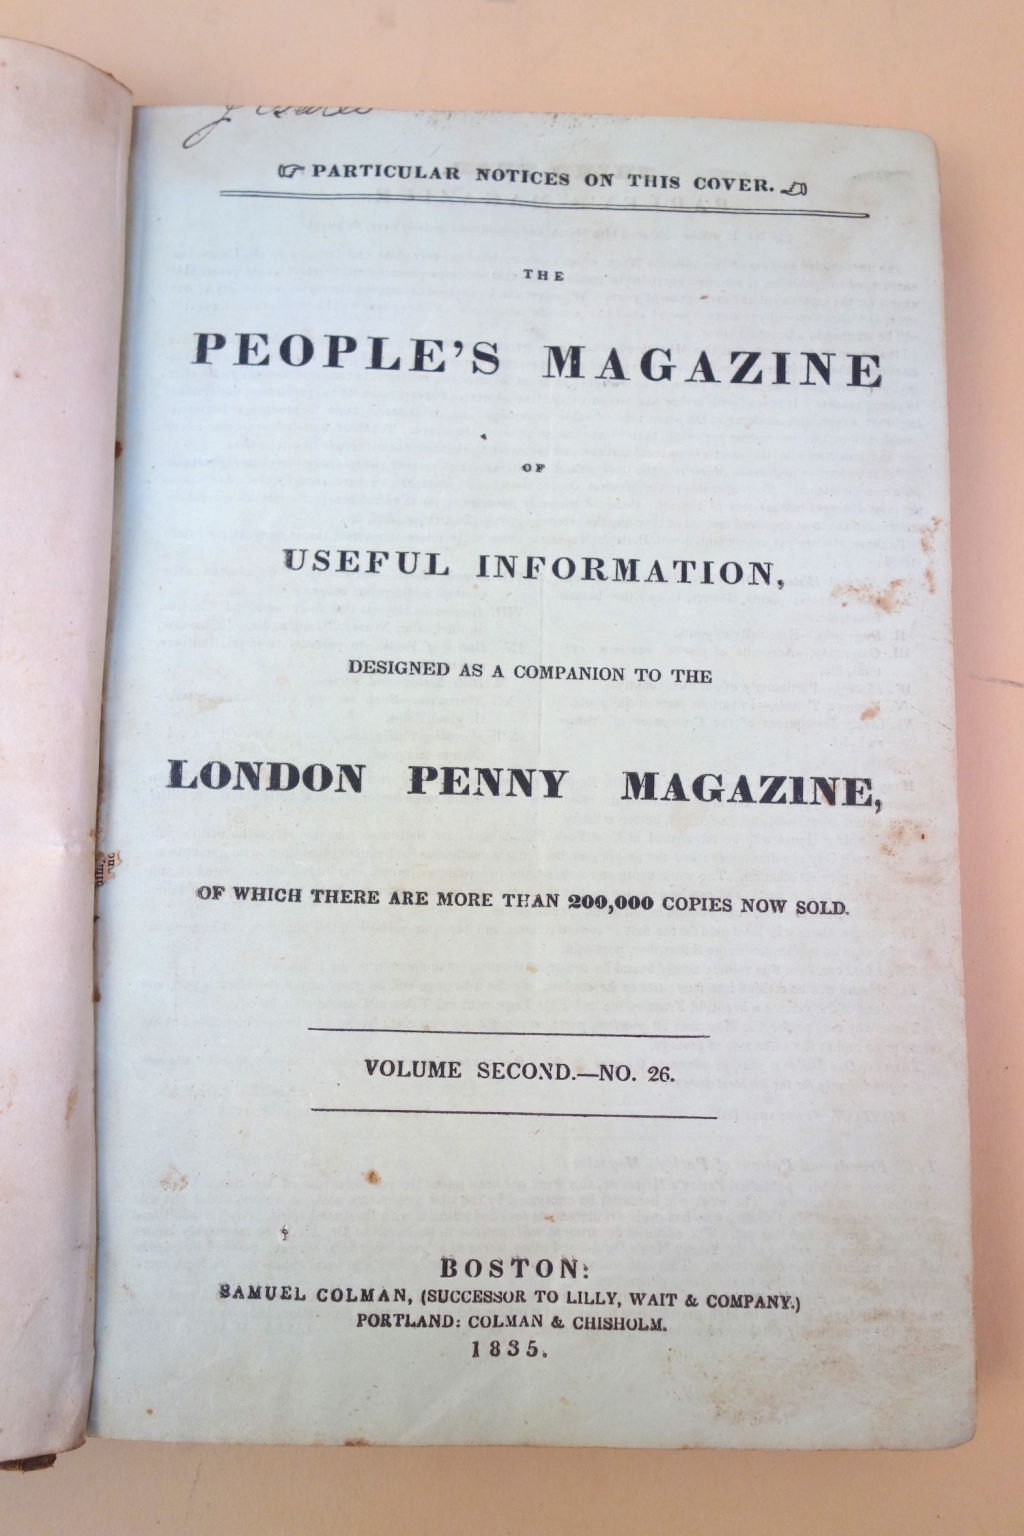 Samuel Coleman of Boston promoted a partnership with Charles Knight's The Penny Magazine. As far as I have been able to tell, this partnership never occurred.